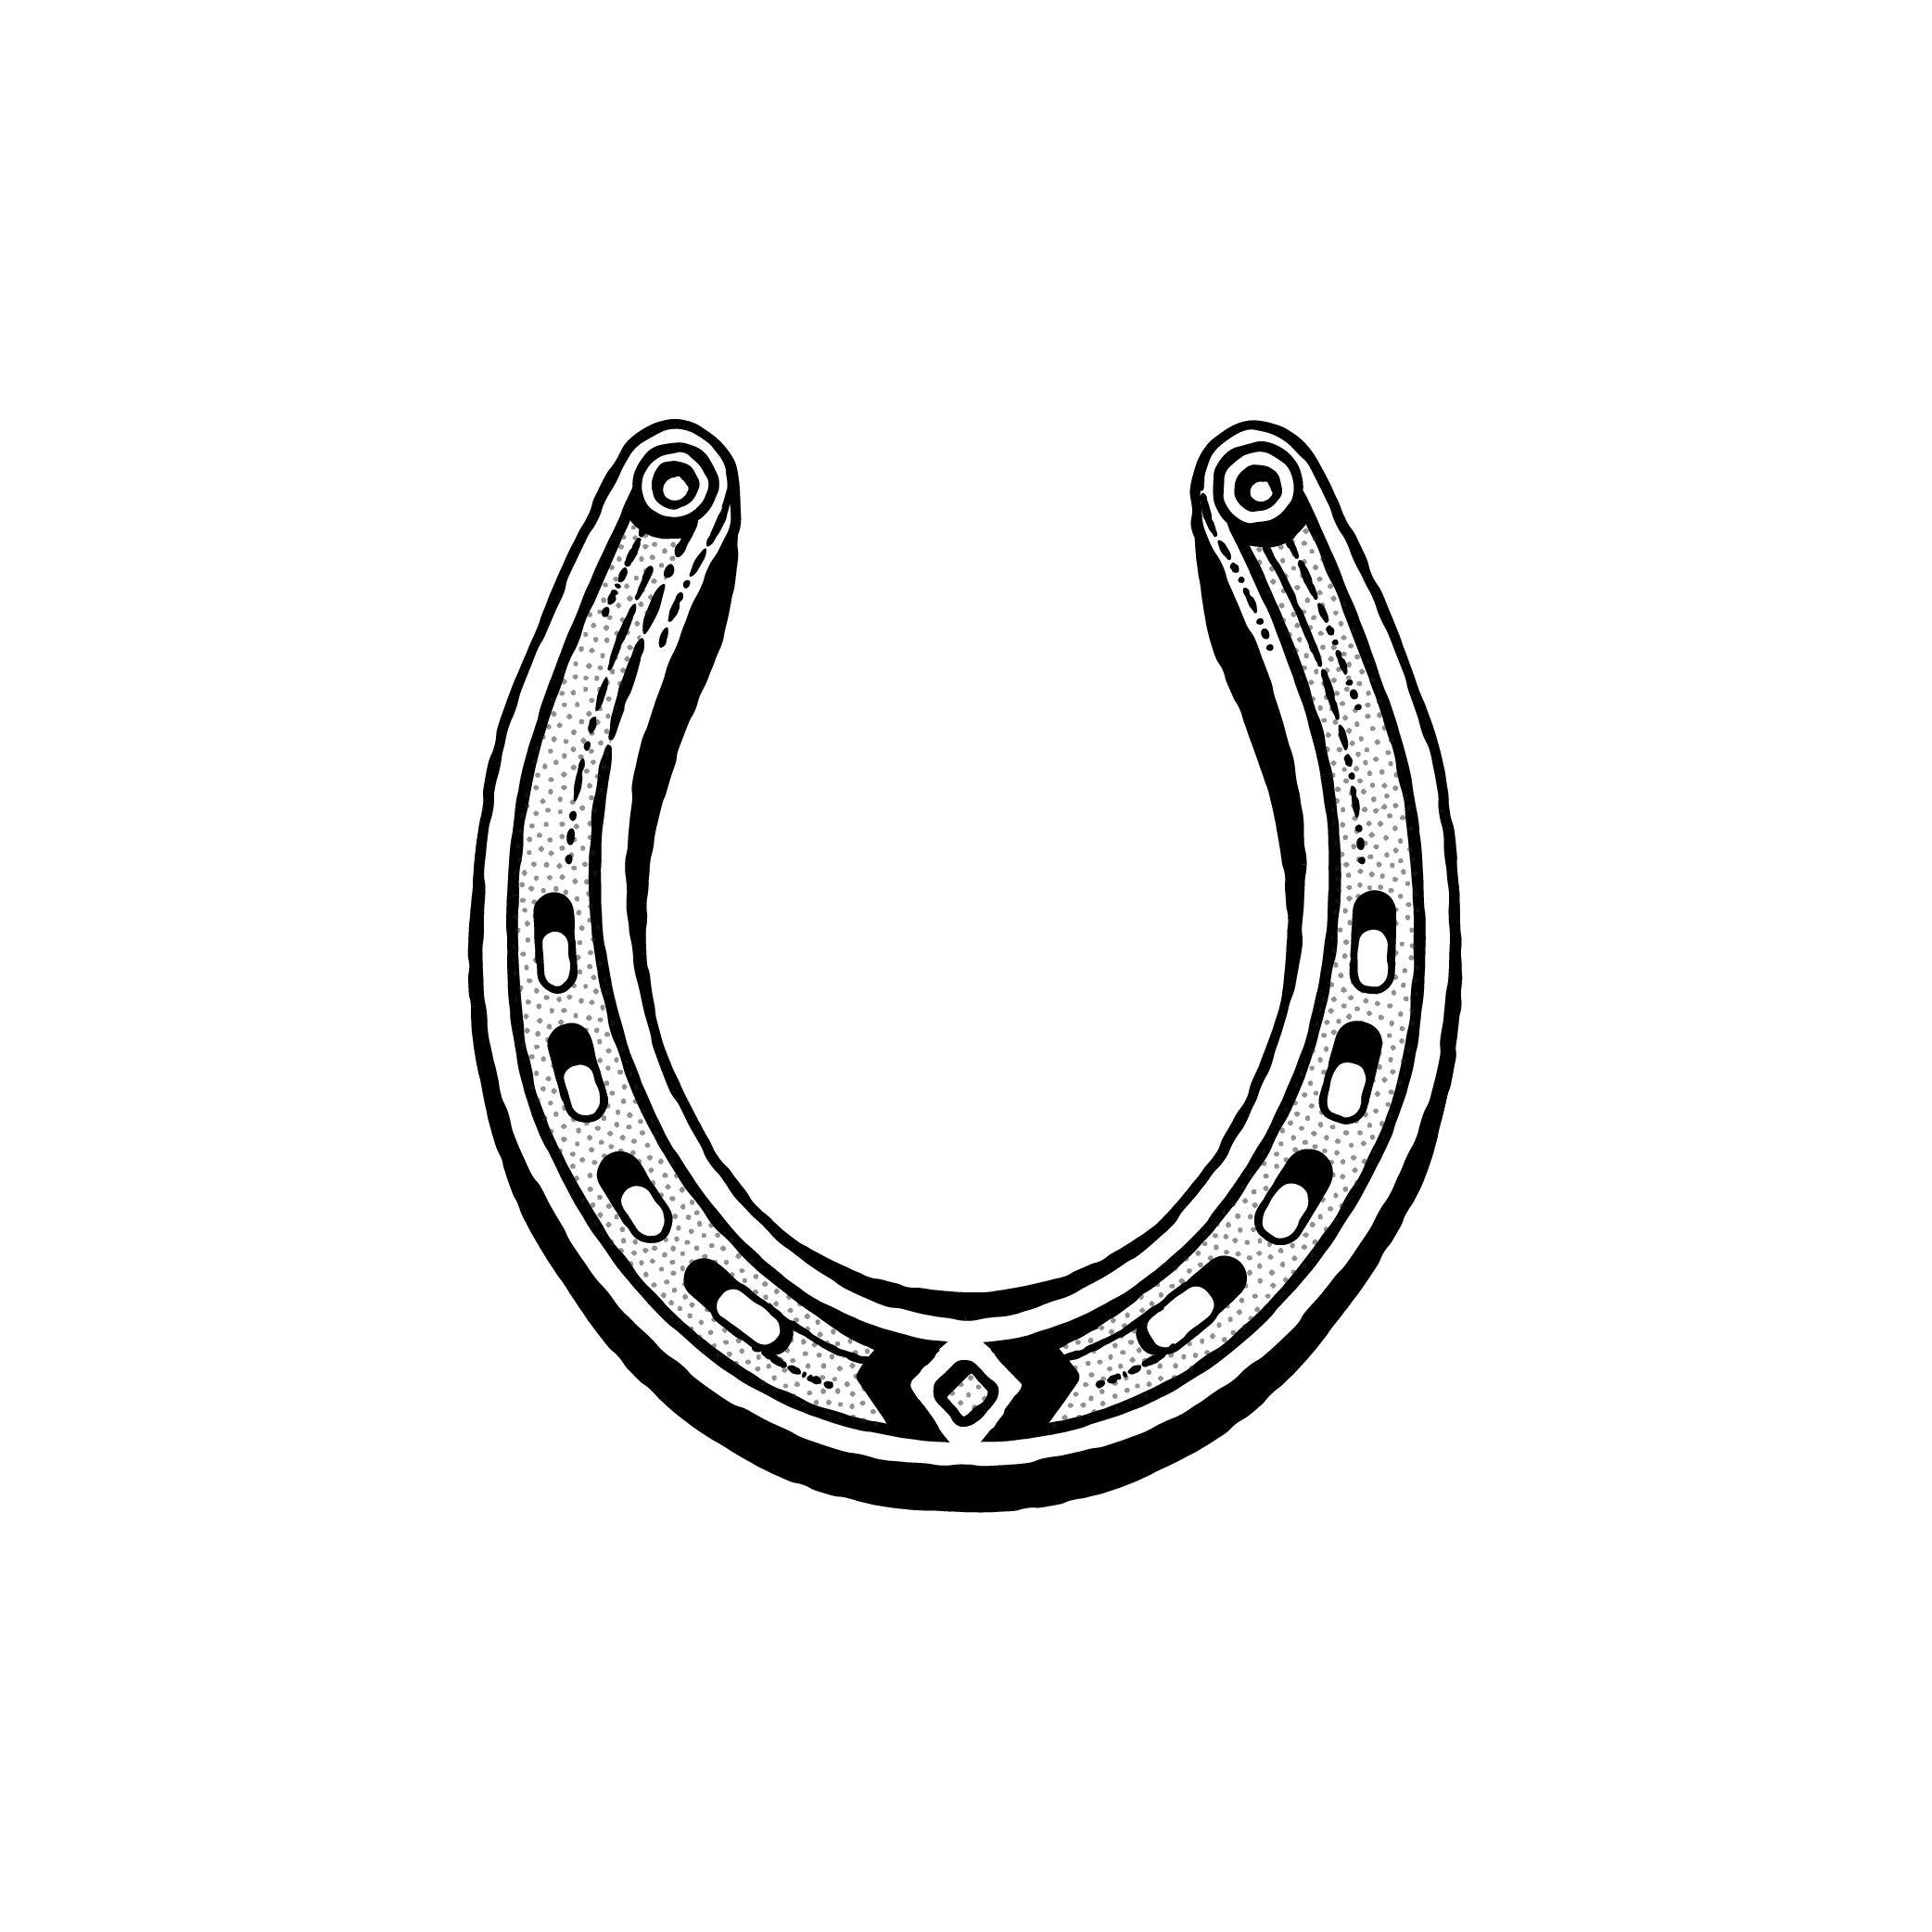 A black and white illustration of a horseshoe oriented with its open end facing upwards. The design includes detailed markings and holes where nails typically attach it to a horse's hoof. The background is solid black, enhancing the horseshoe's intricate details.